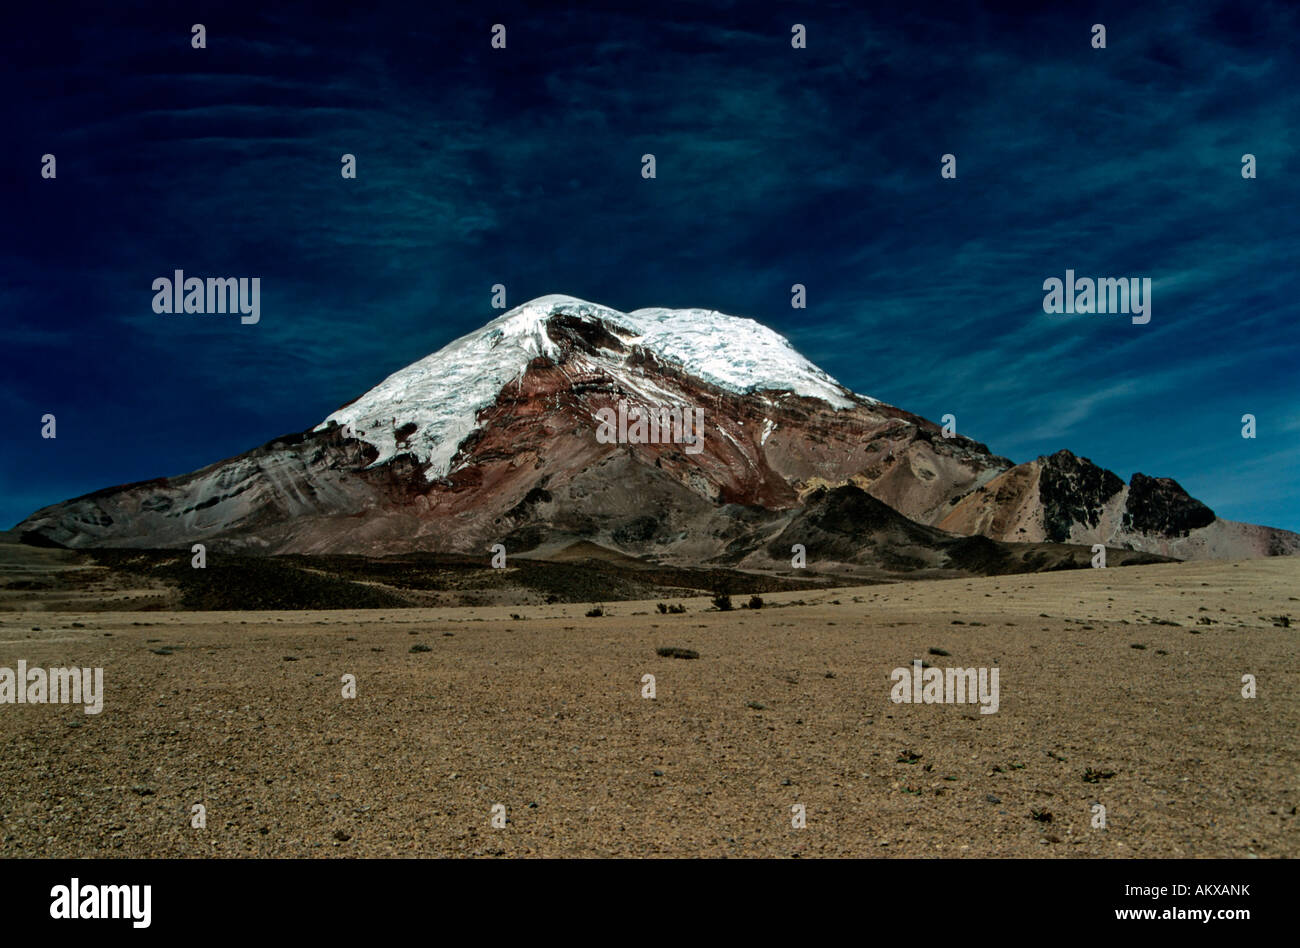 Volcano Chimborazo, with 6310 meters the highest mountain in Ecuador, South America Stock Photo